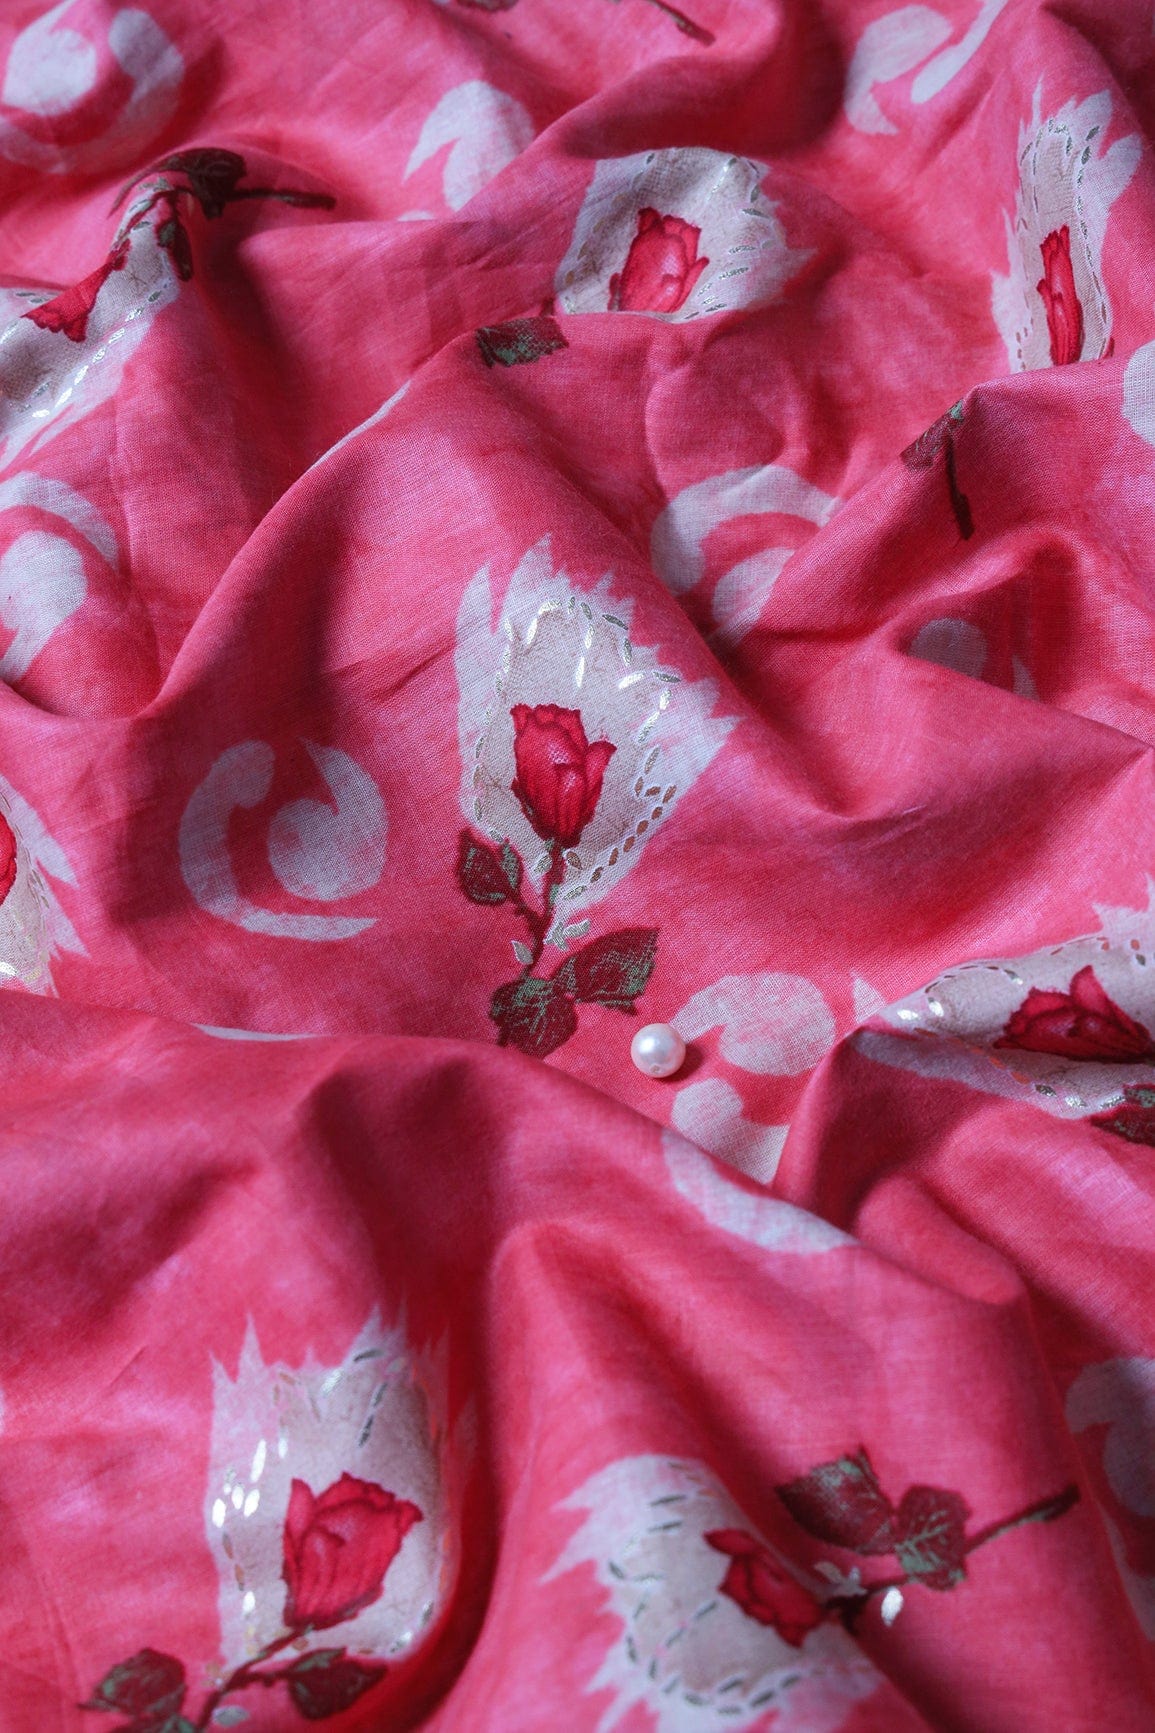 doeraa Prints Watermelon Pink And Beige Color Floral Foil Print On Pure Mul Cotton Fabric